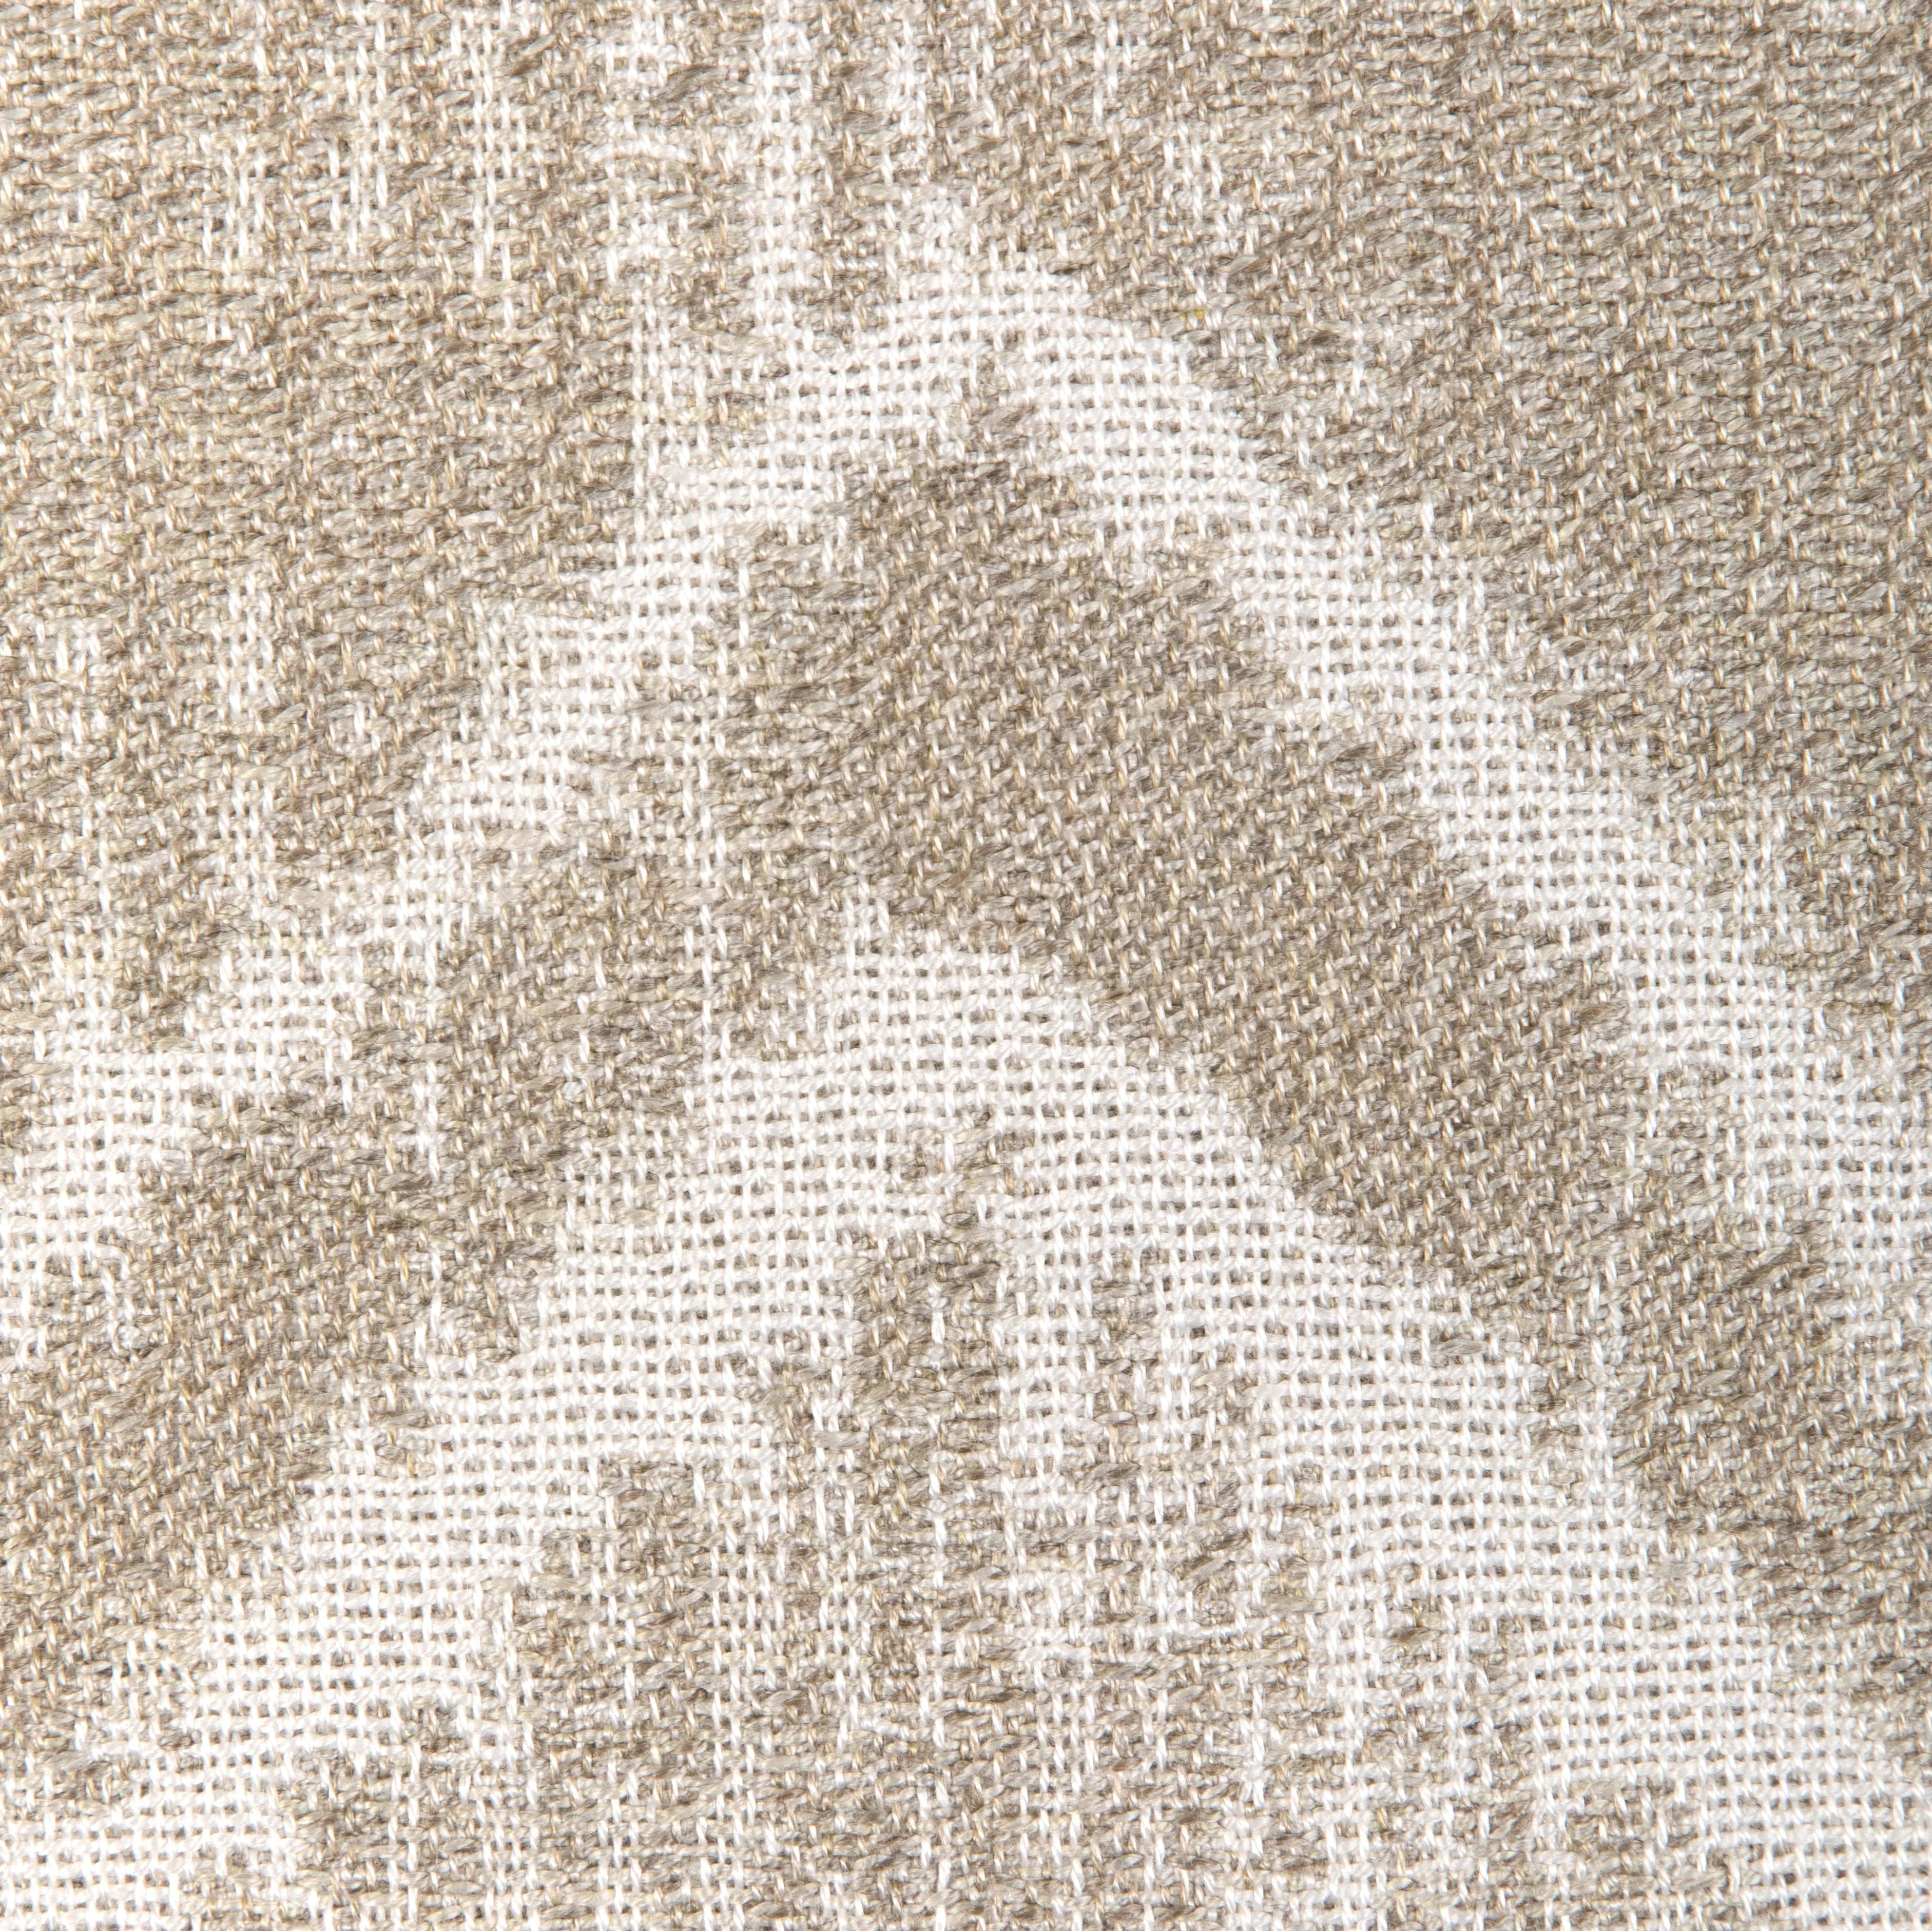 Detail view of Riviera Batik fabric in sand color - pattern 36934.16.0 - by Kravet Couture in the Riviera collection